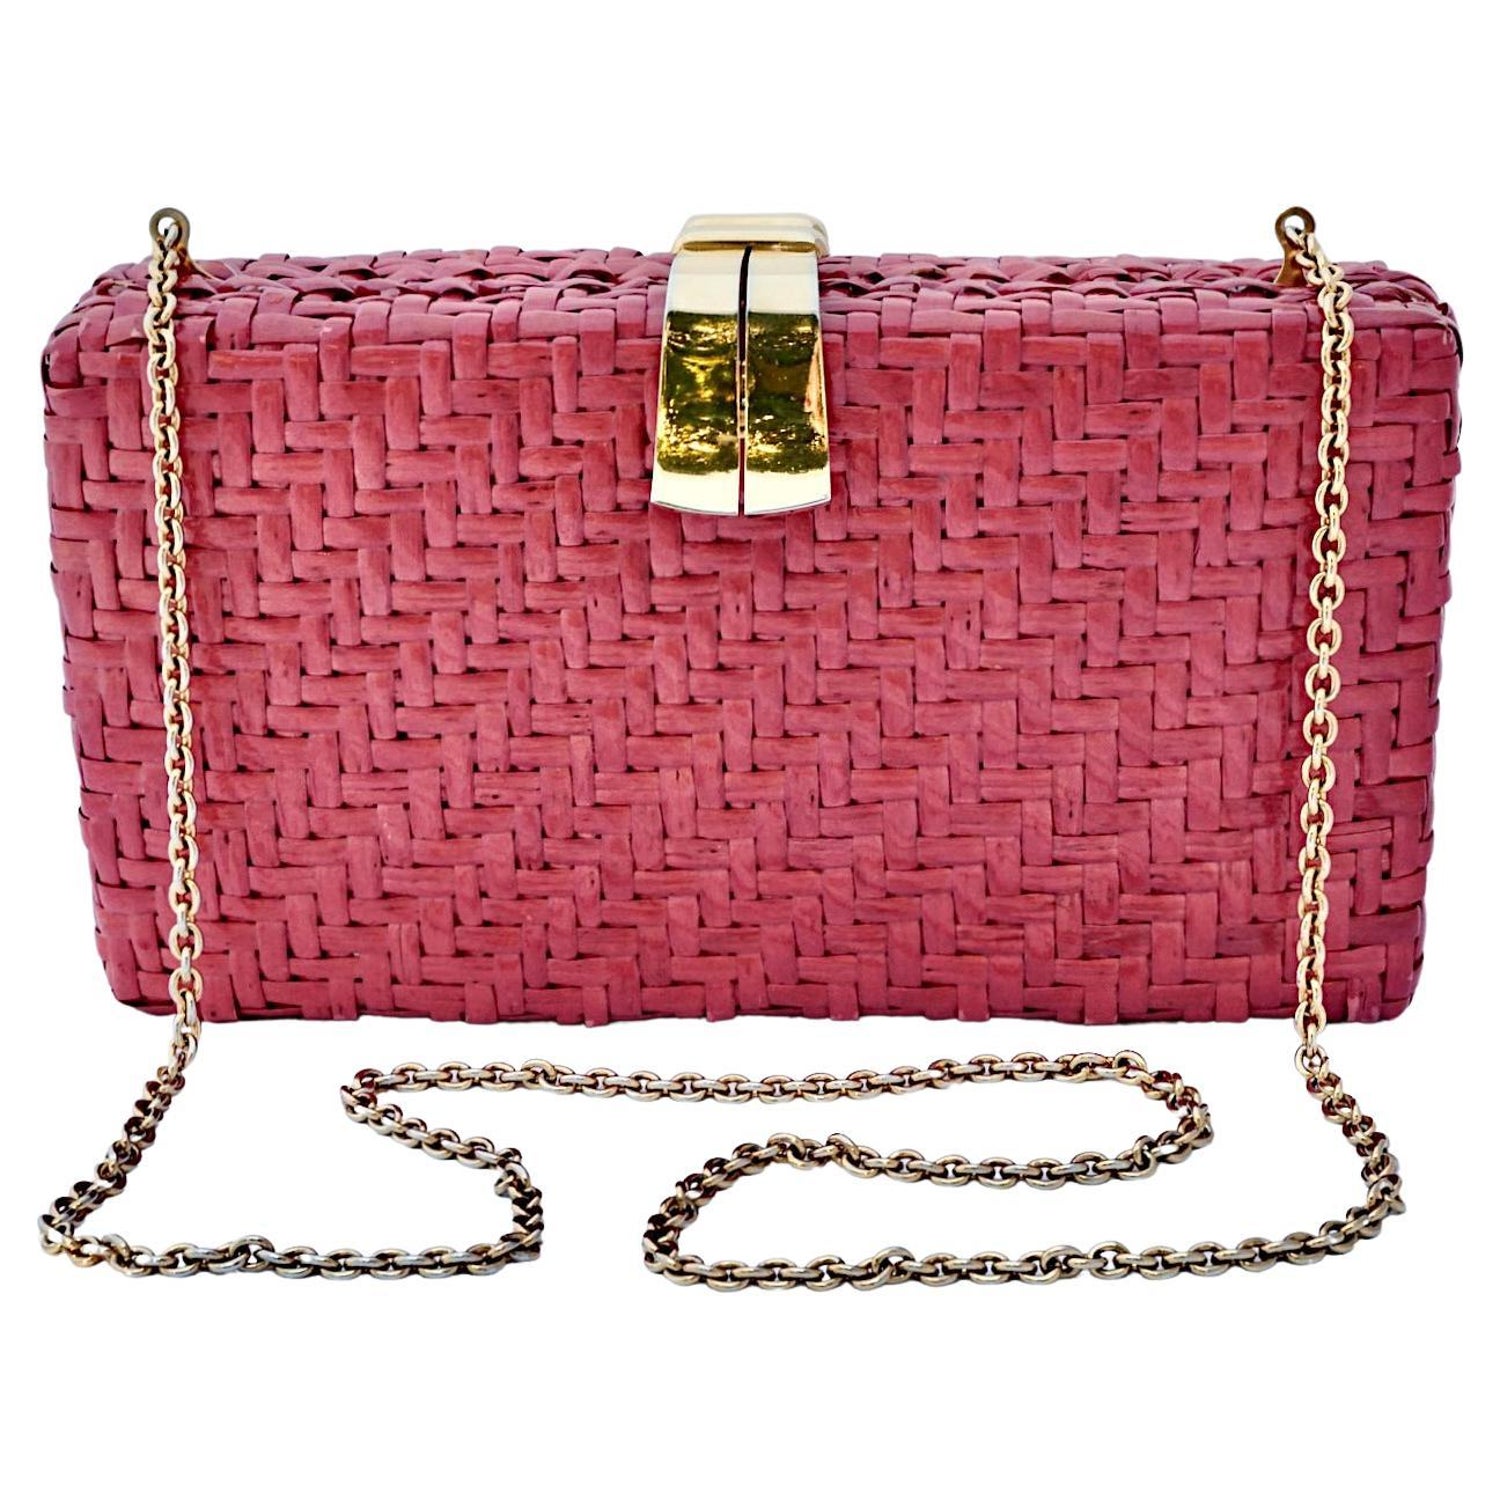 4) Rodo & Other Designer Evening Bags Auction